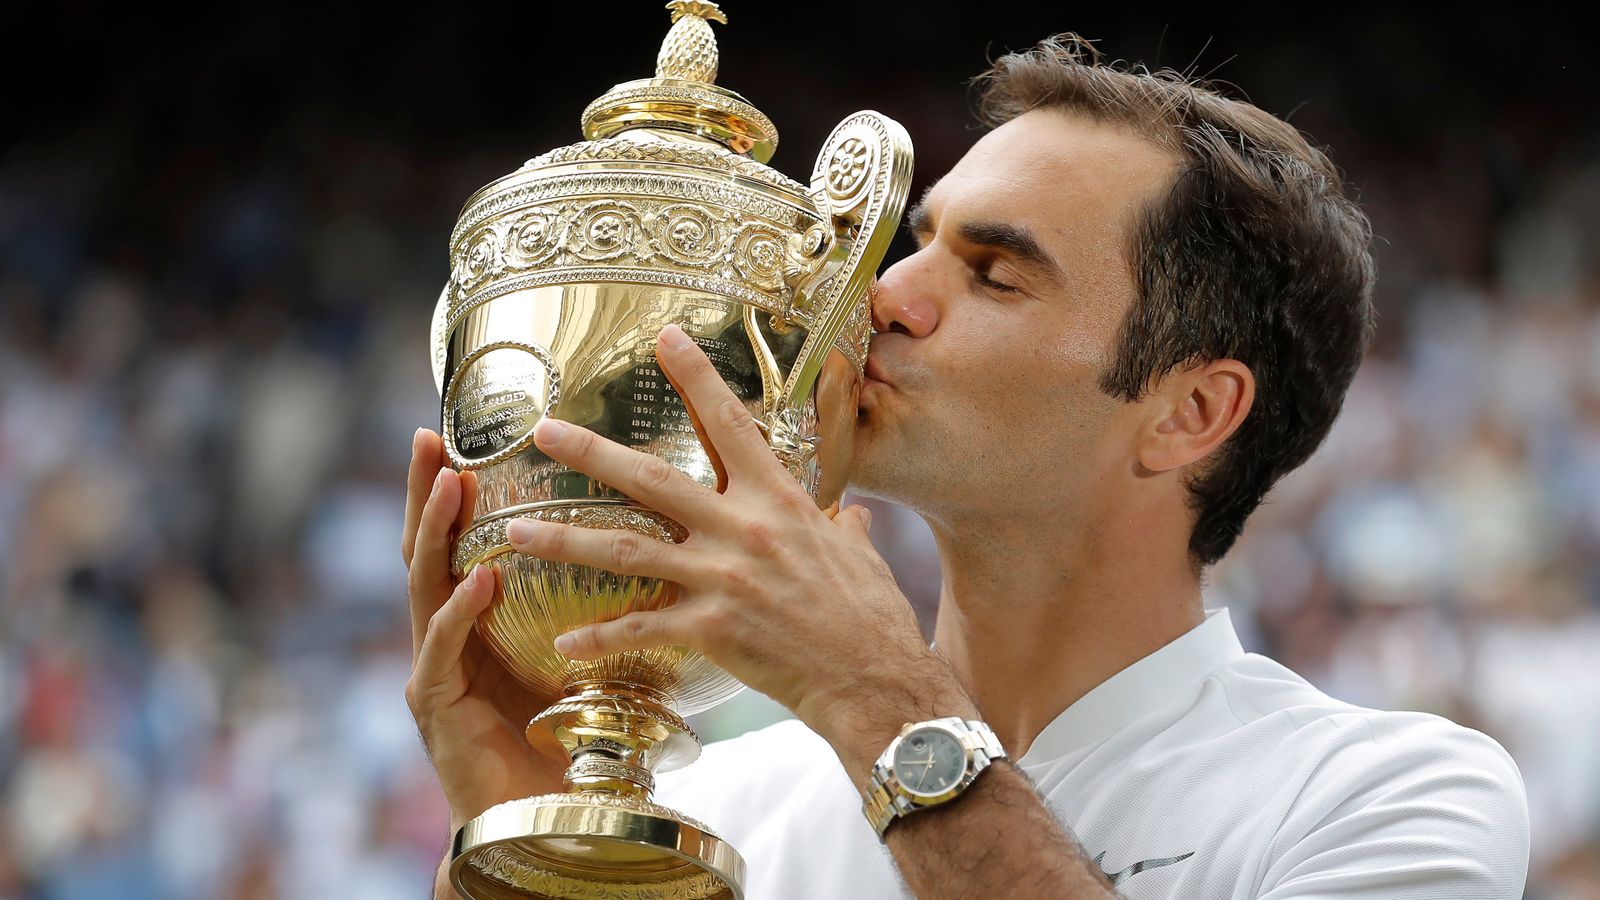 Roger Federer is looking forward to competing at the French Open and Wimbledon